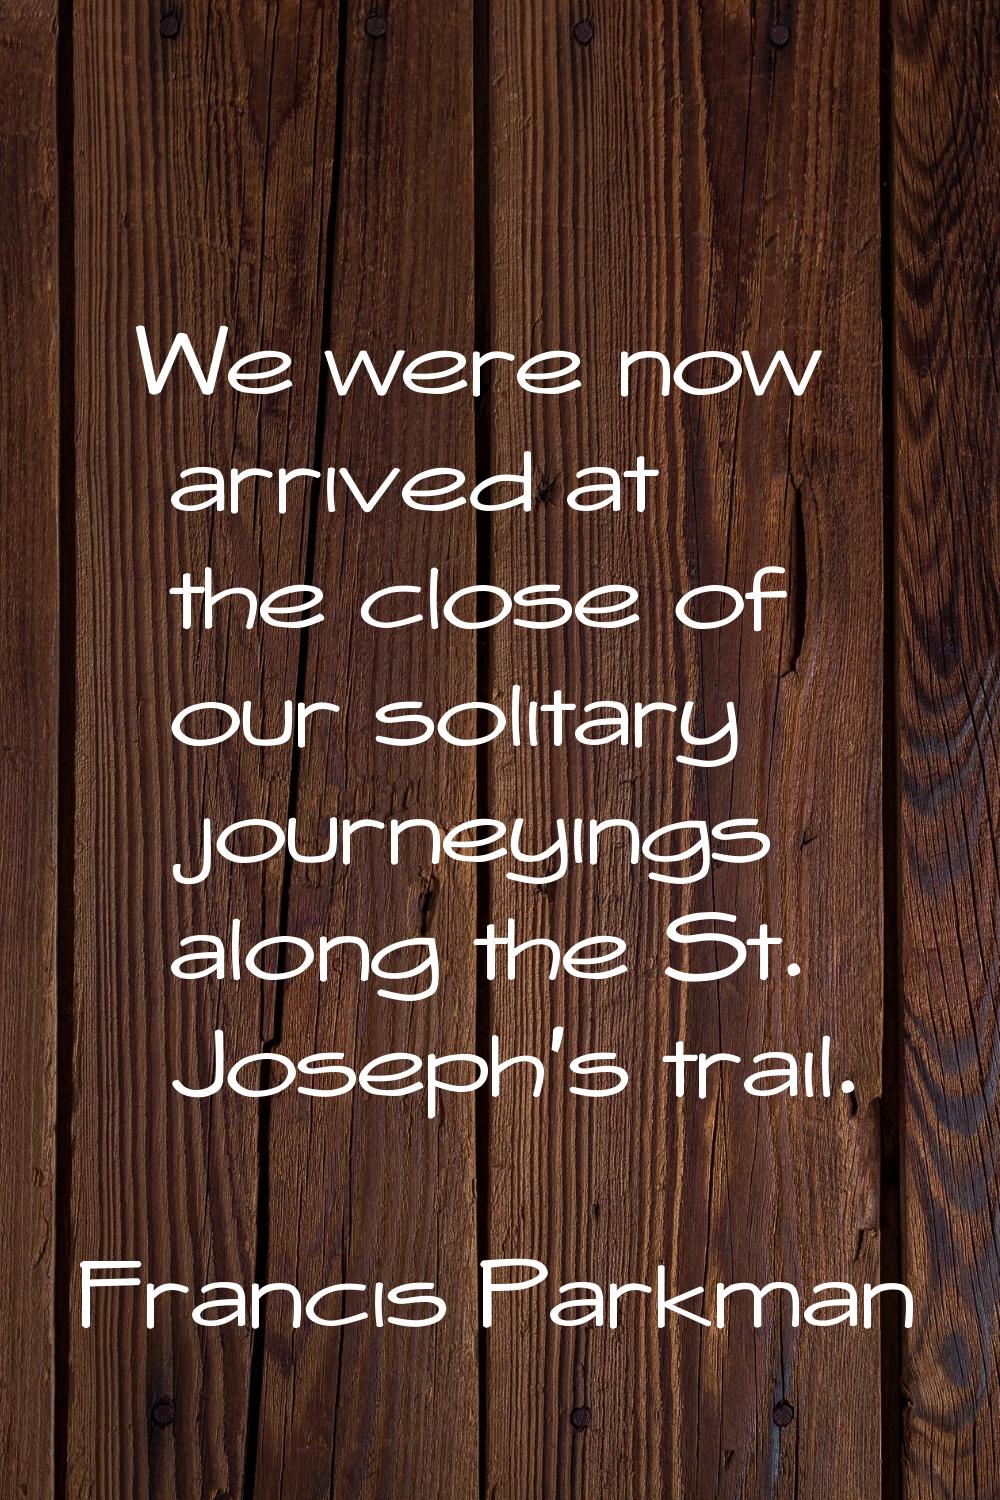 We were now arrived at the close of our solitary journeyings along the St. Joseph's trail.